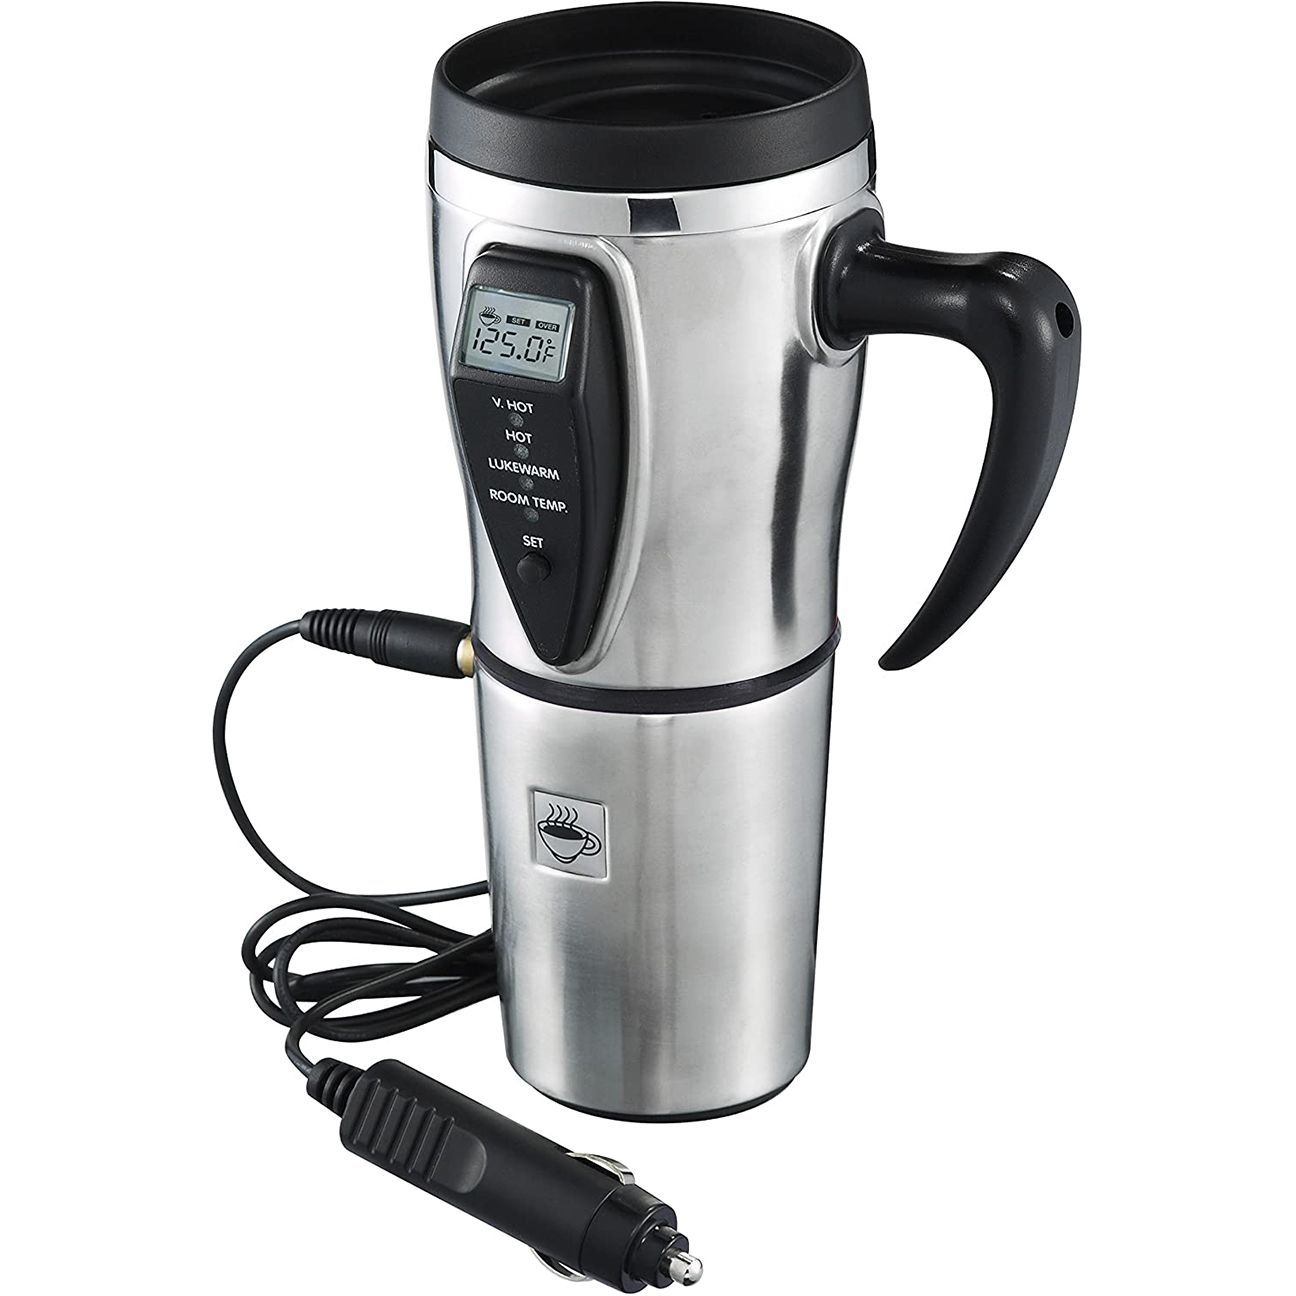 Heated Smart Travel Mug with Temperature Control